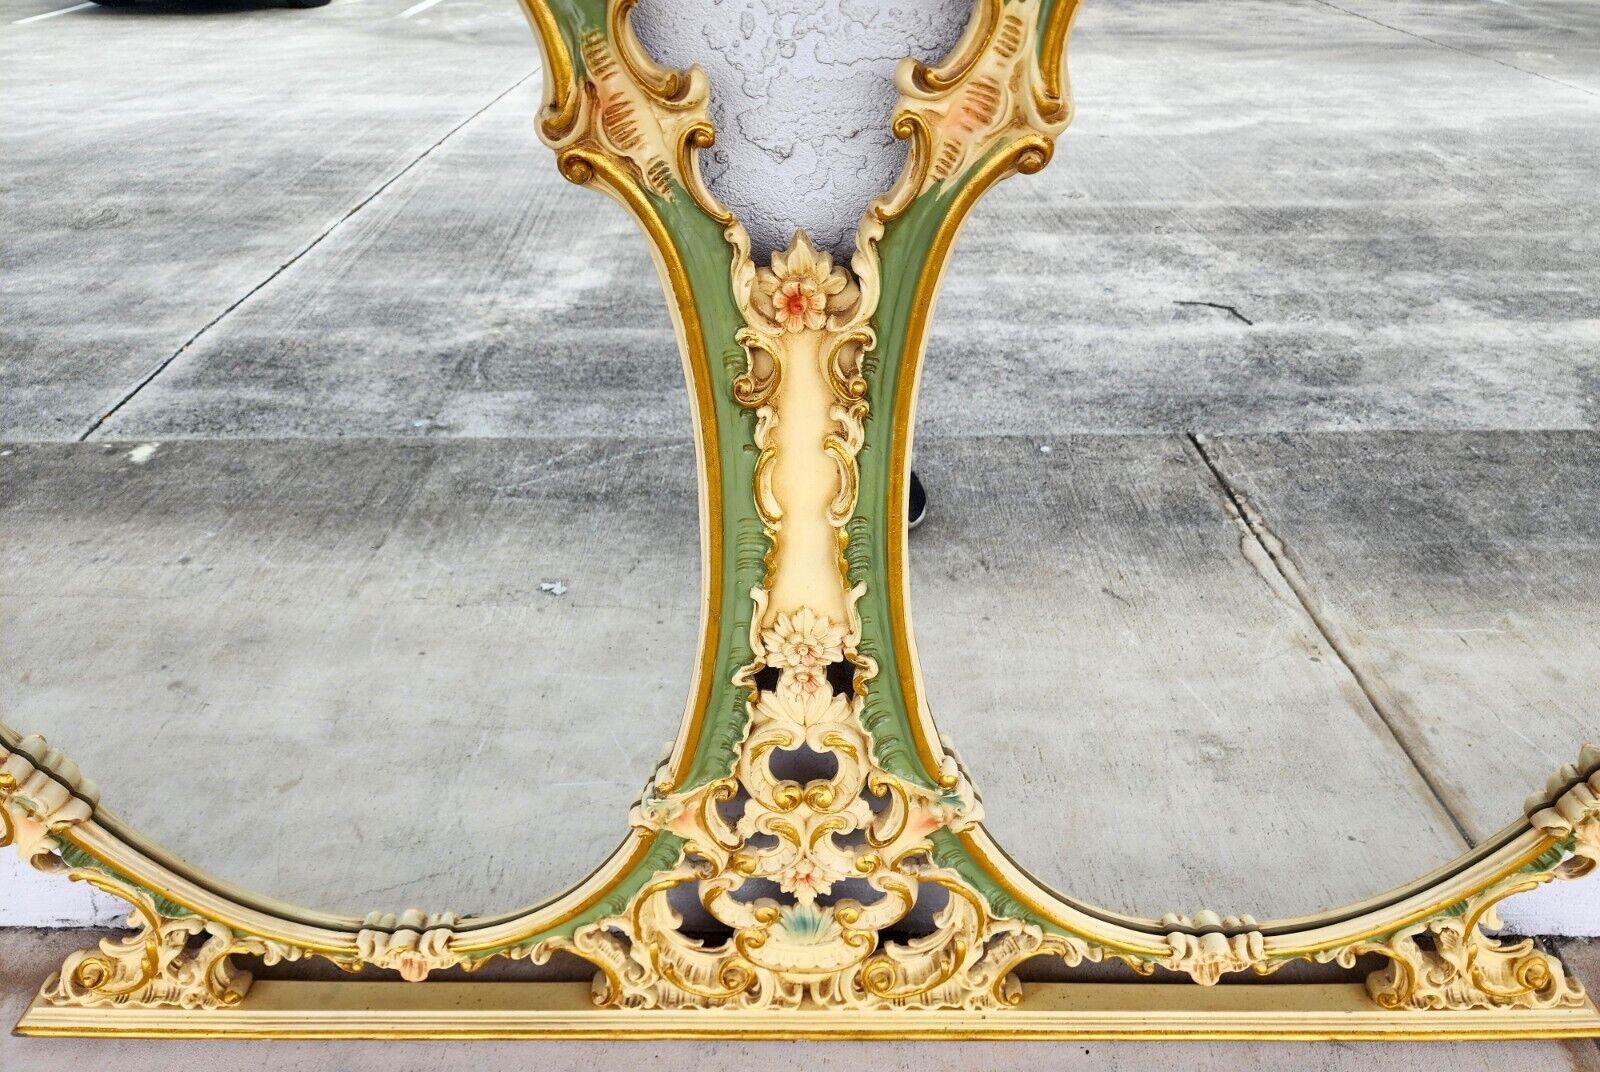 For FULL item description click on CONTINUE READING at the bottom of this page.

Offering One Of Our Recent Palm Beach Estate Fine Furniture Acquisitions Of A 
Vintage Ornate Italian Dual Dressing Dresser Mirror 
Can be hung on wall or placed on a